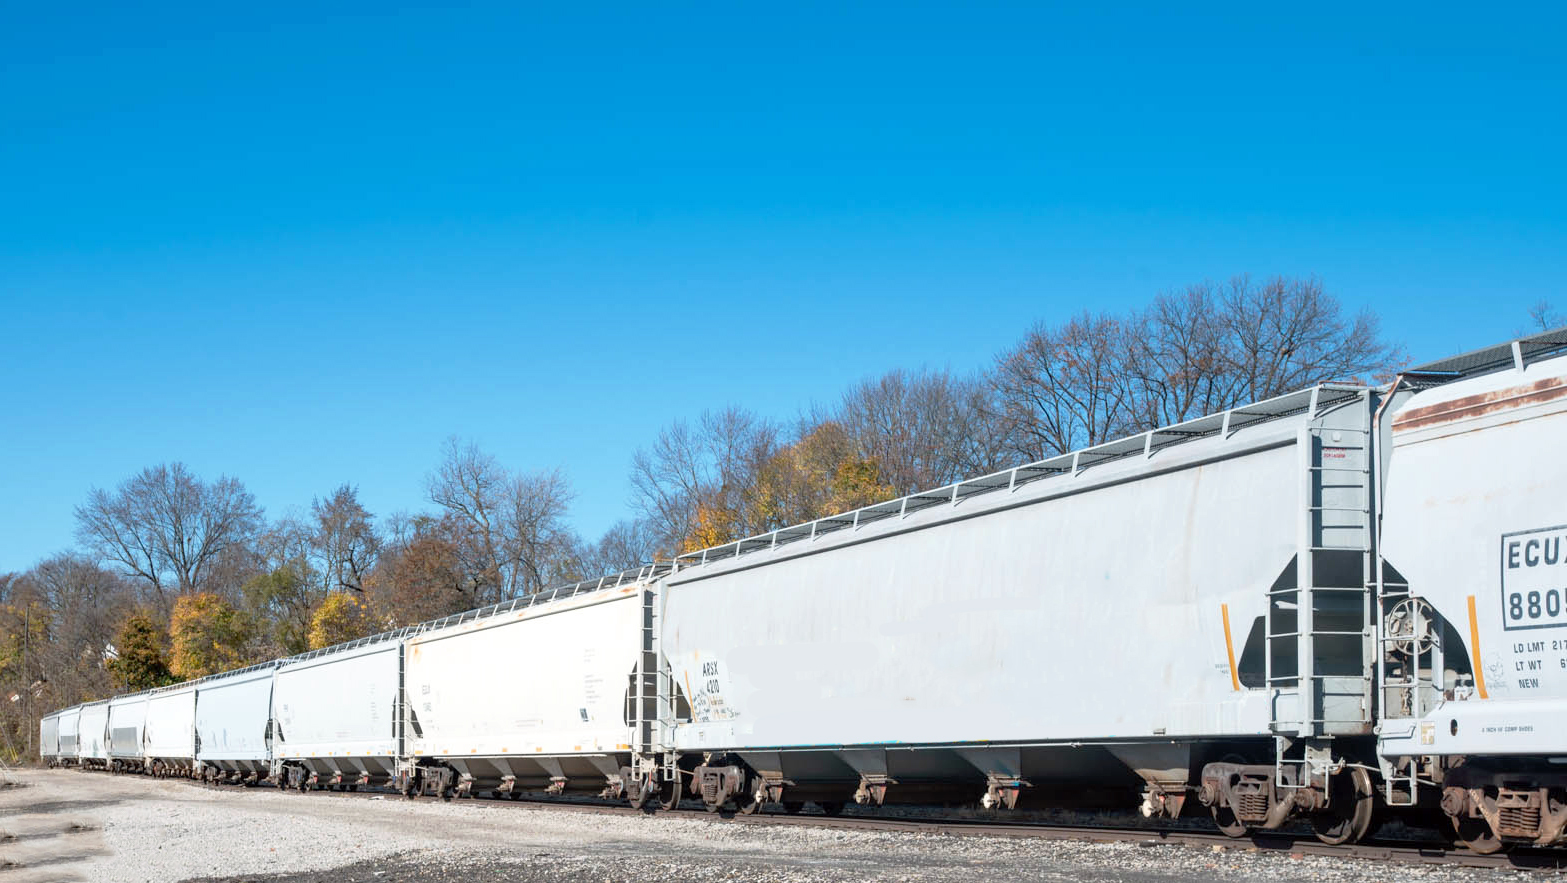 These hopper cars are used to support ASW's polymer (resin) bulk transloading services.